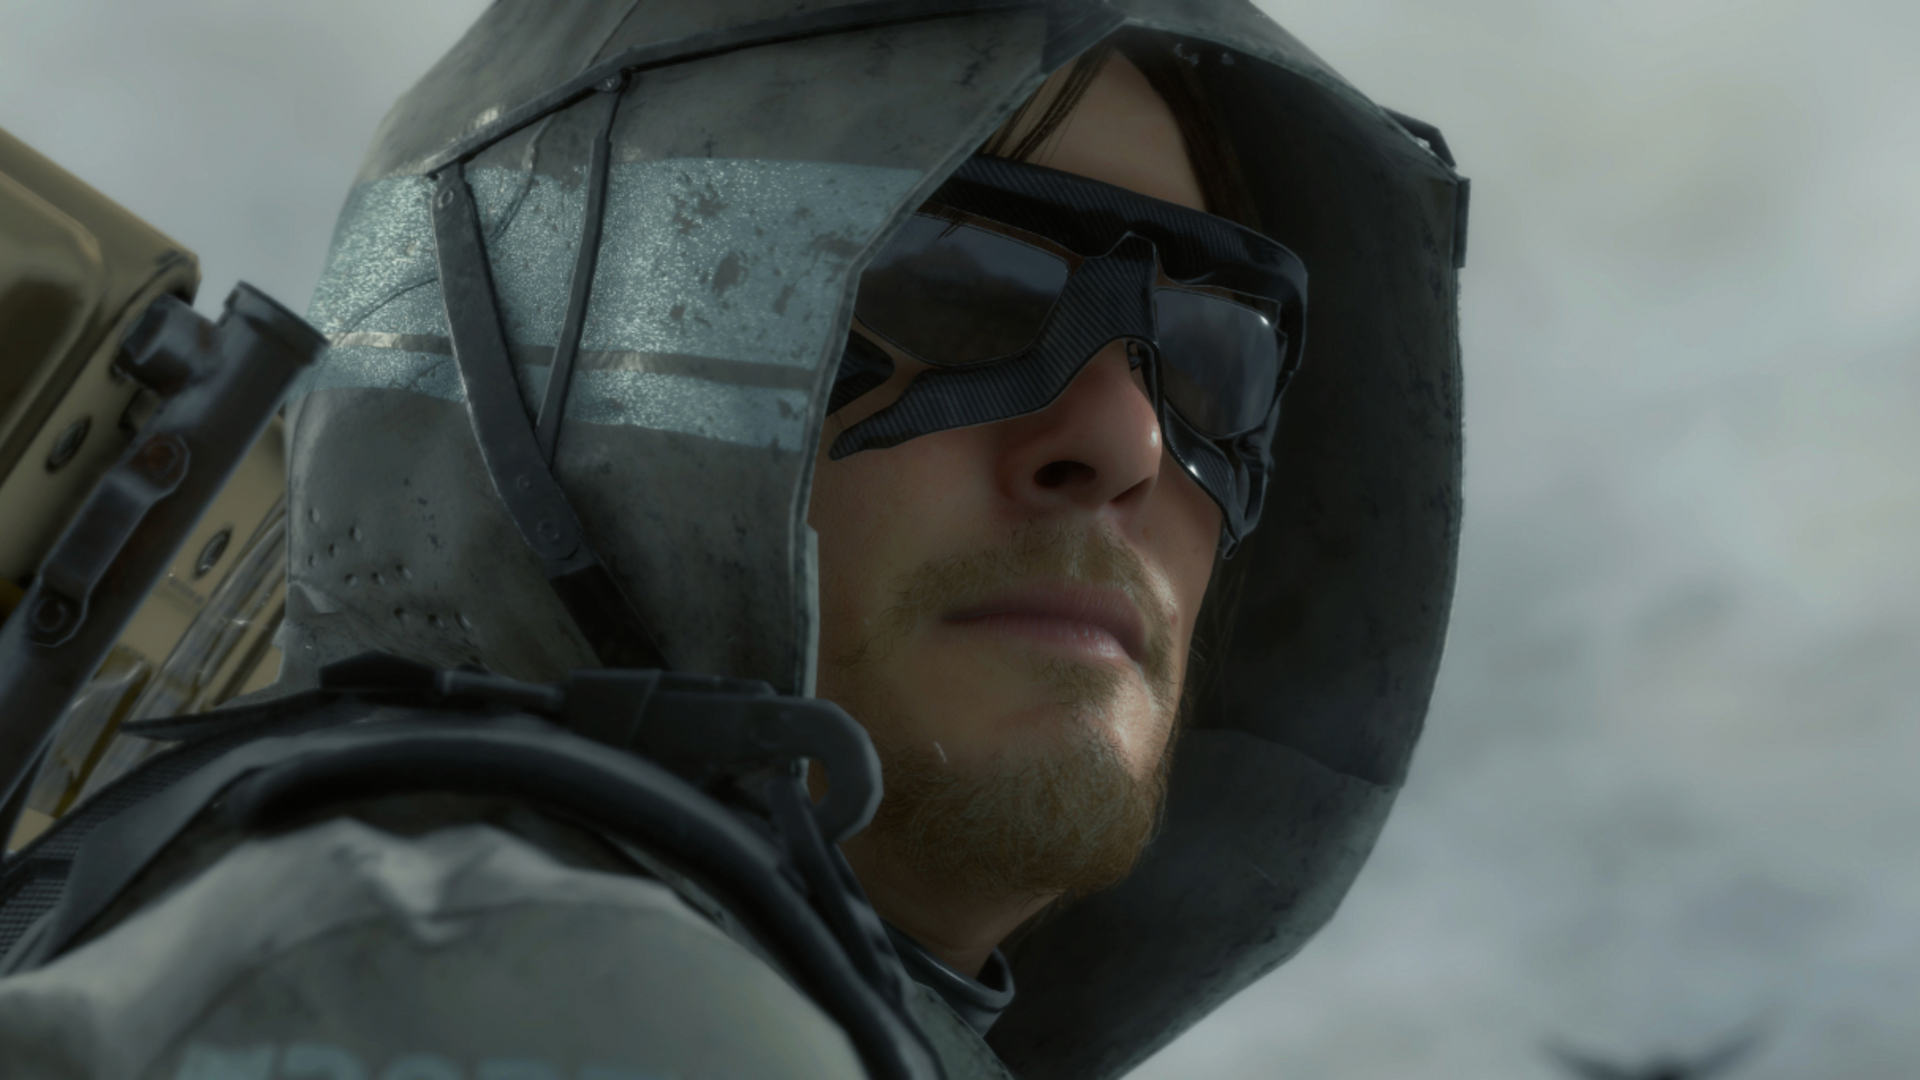 FREE Death Stranding on Epic Games Store (updated)